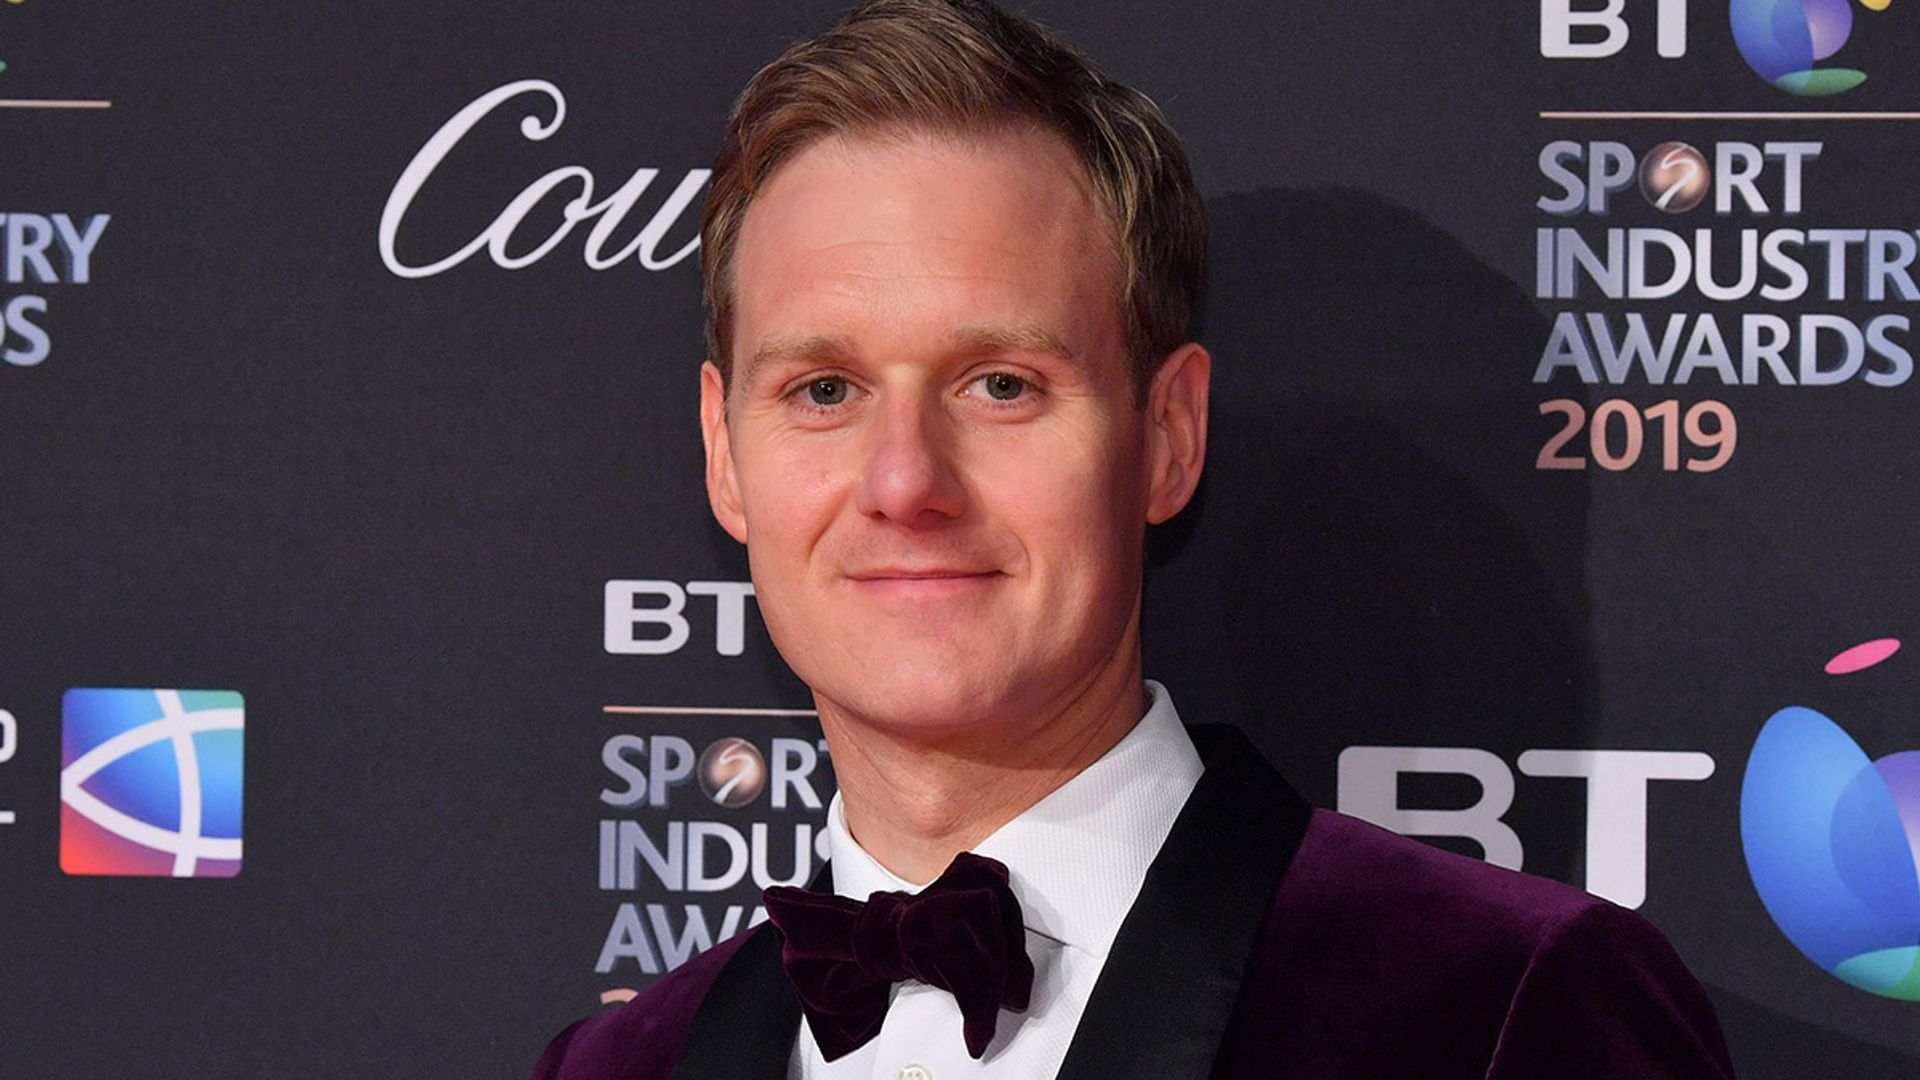 Dan Walker stuns fans with his 11-year-old daughter's birthday cake